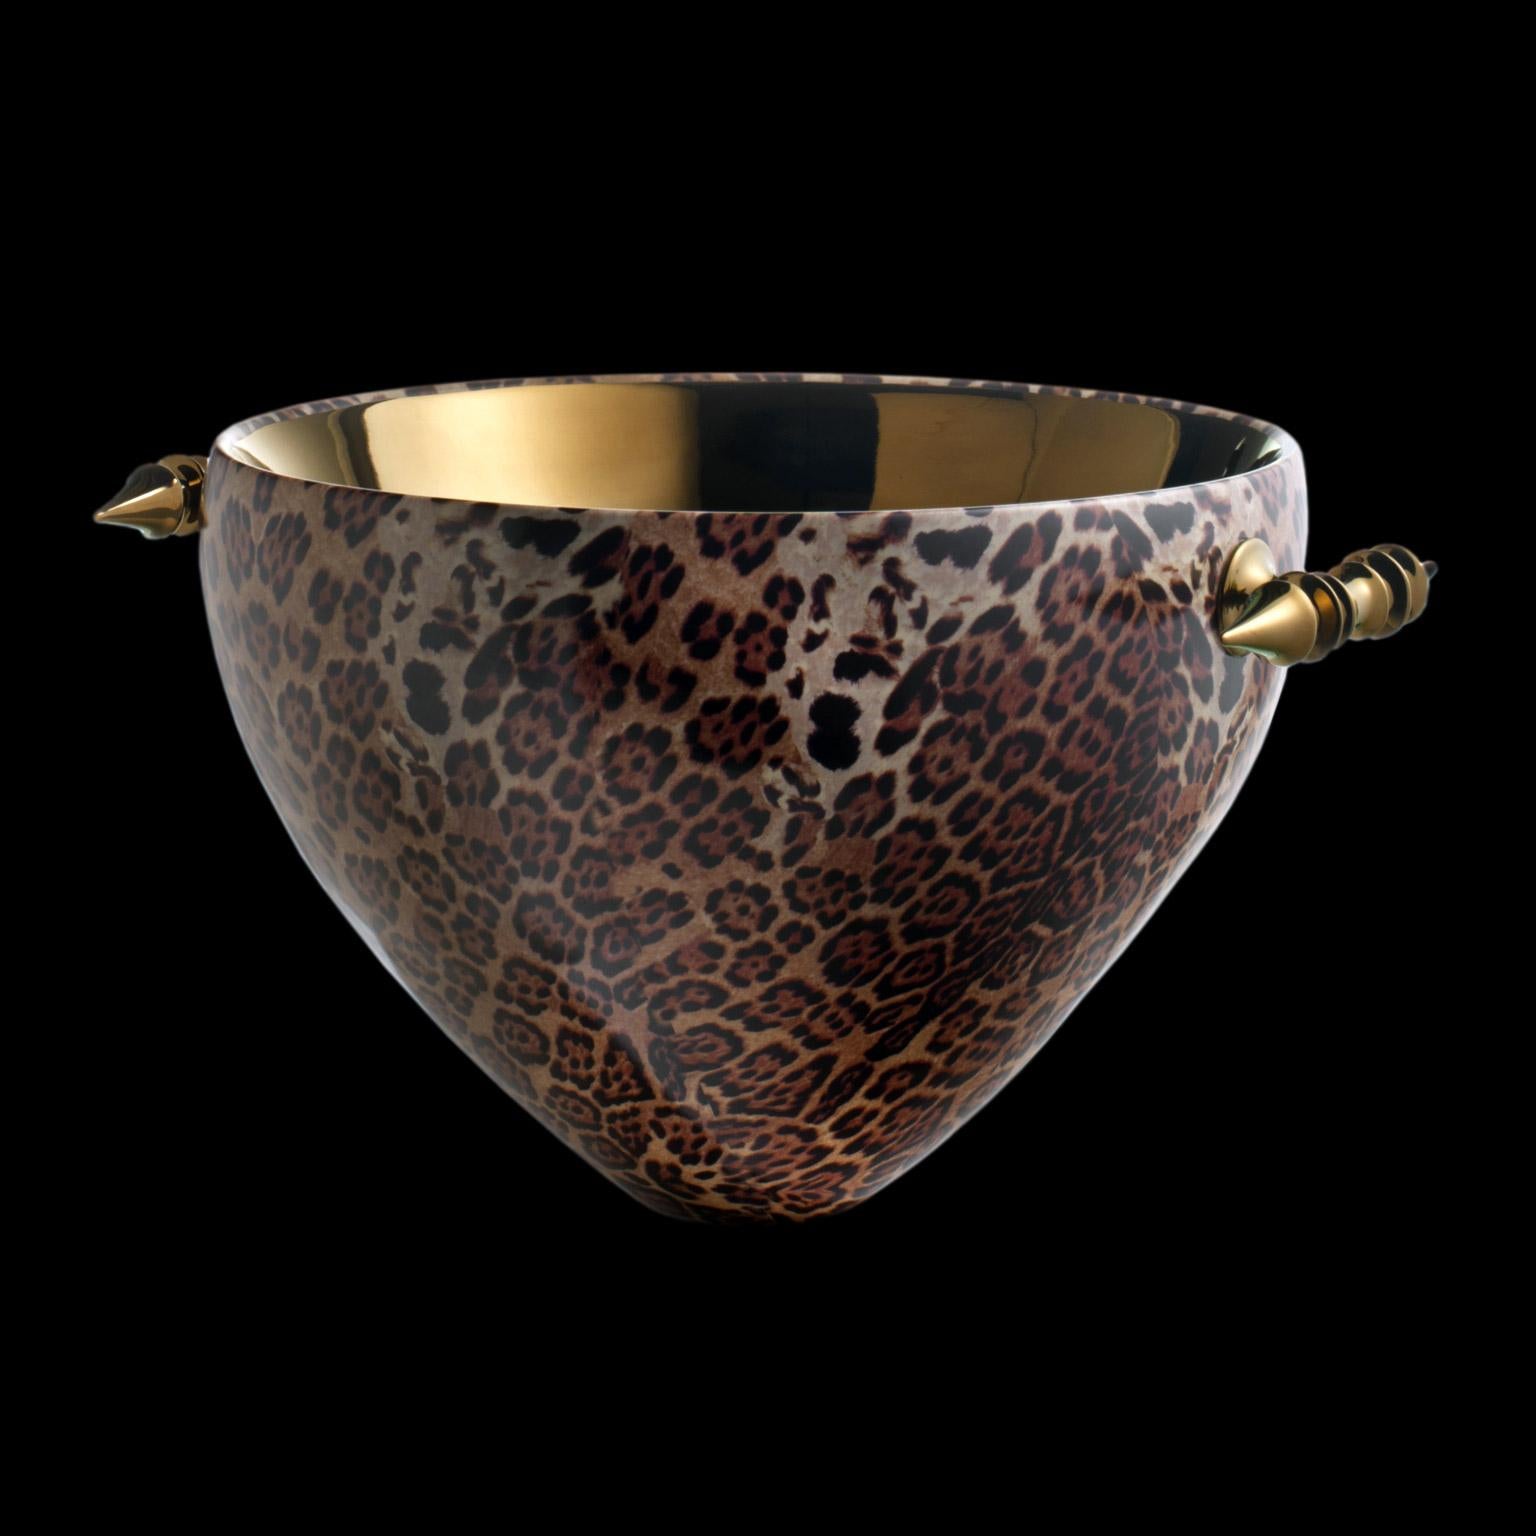 Ceramic bowl GABRIEL, leopard decorated with inside and handles handcrafted in bronze

code CP036H
measures: H. 40.0 cm. - Dm. 70.0 cm.